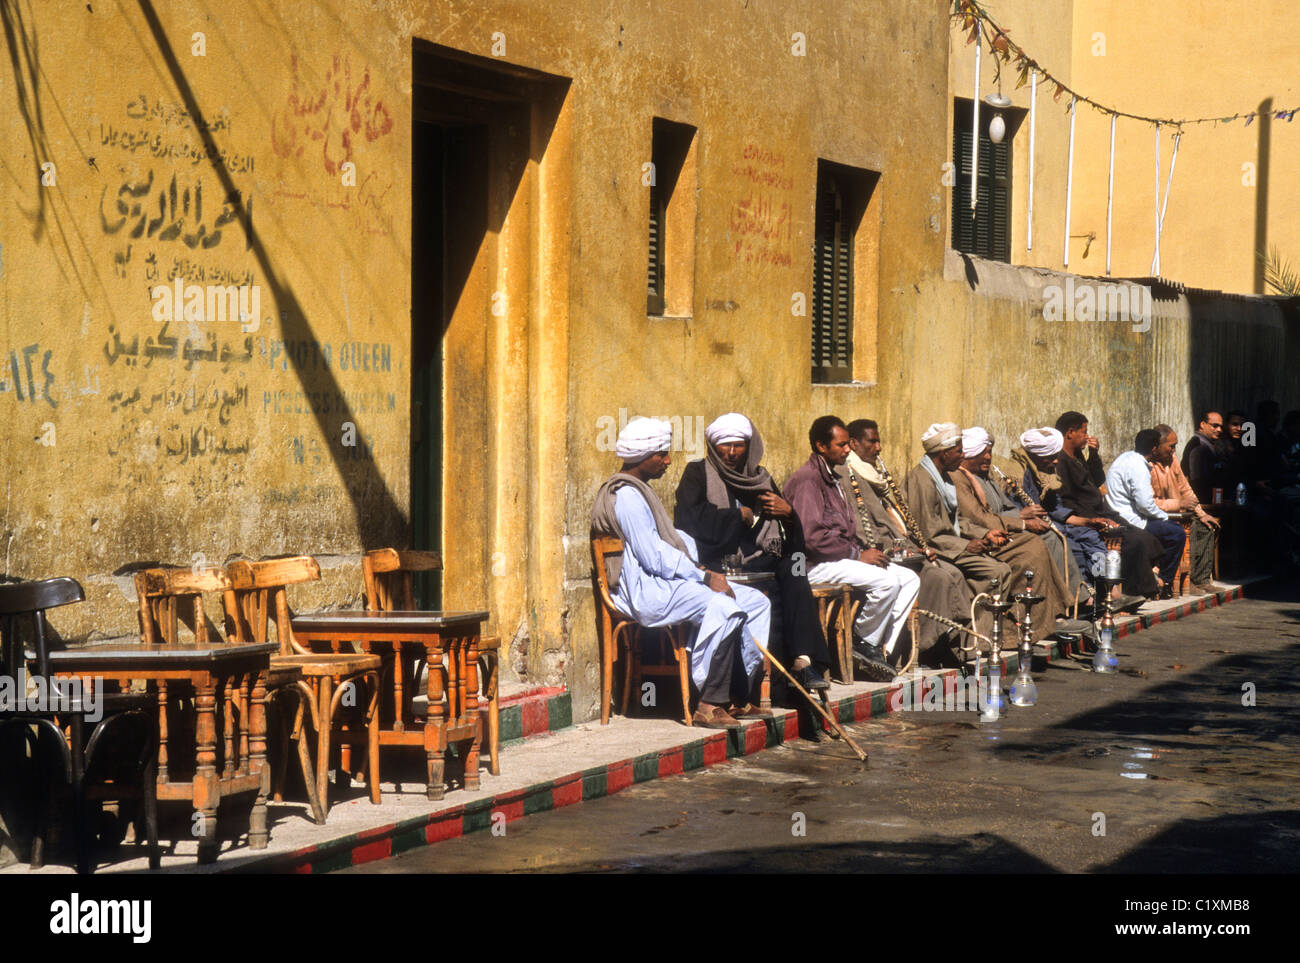 Men smoking waterpipes and drinking coffee outside cafe, Luxor, Egypt Stock Photo